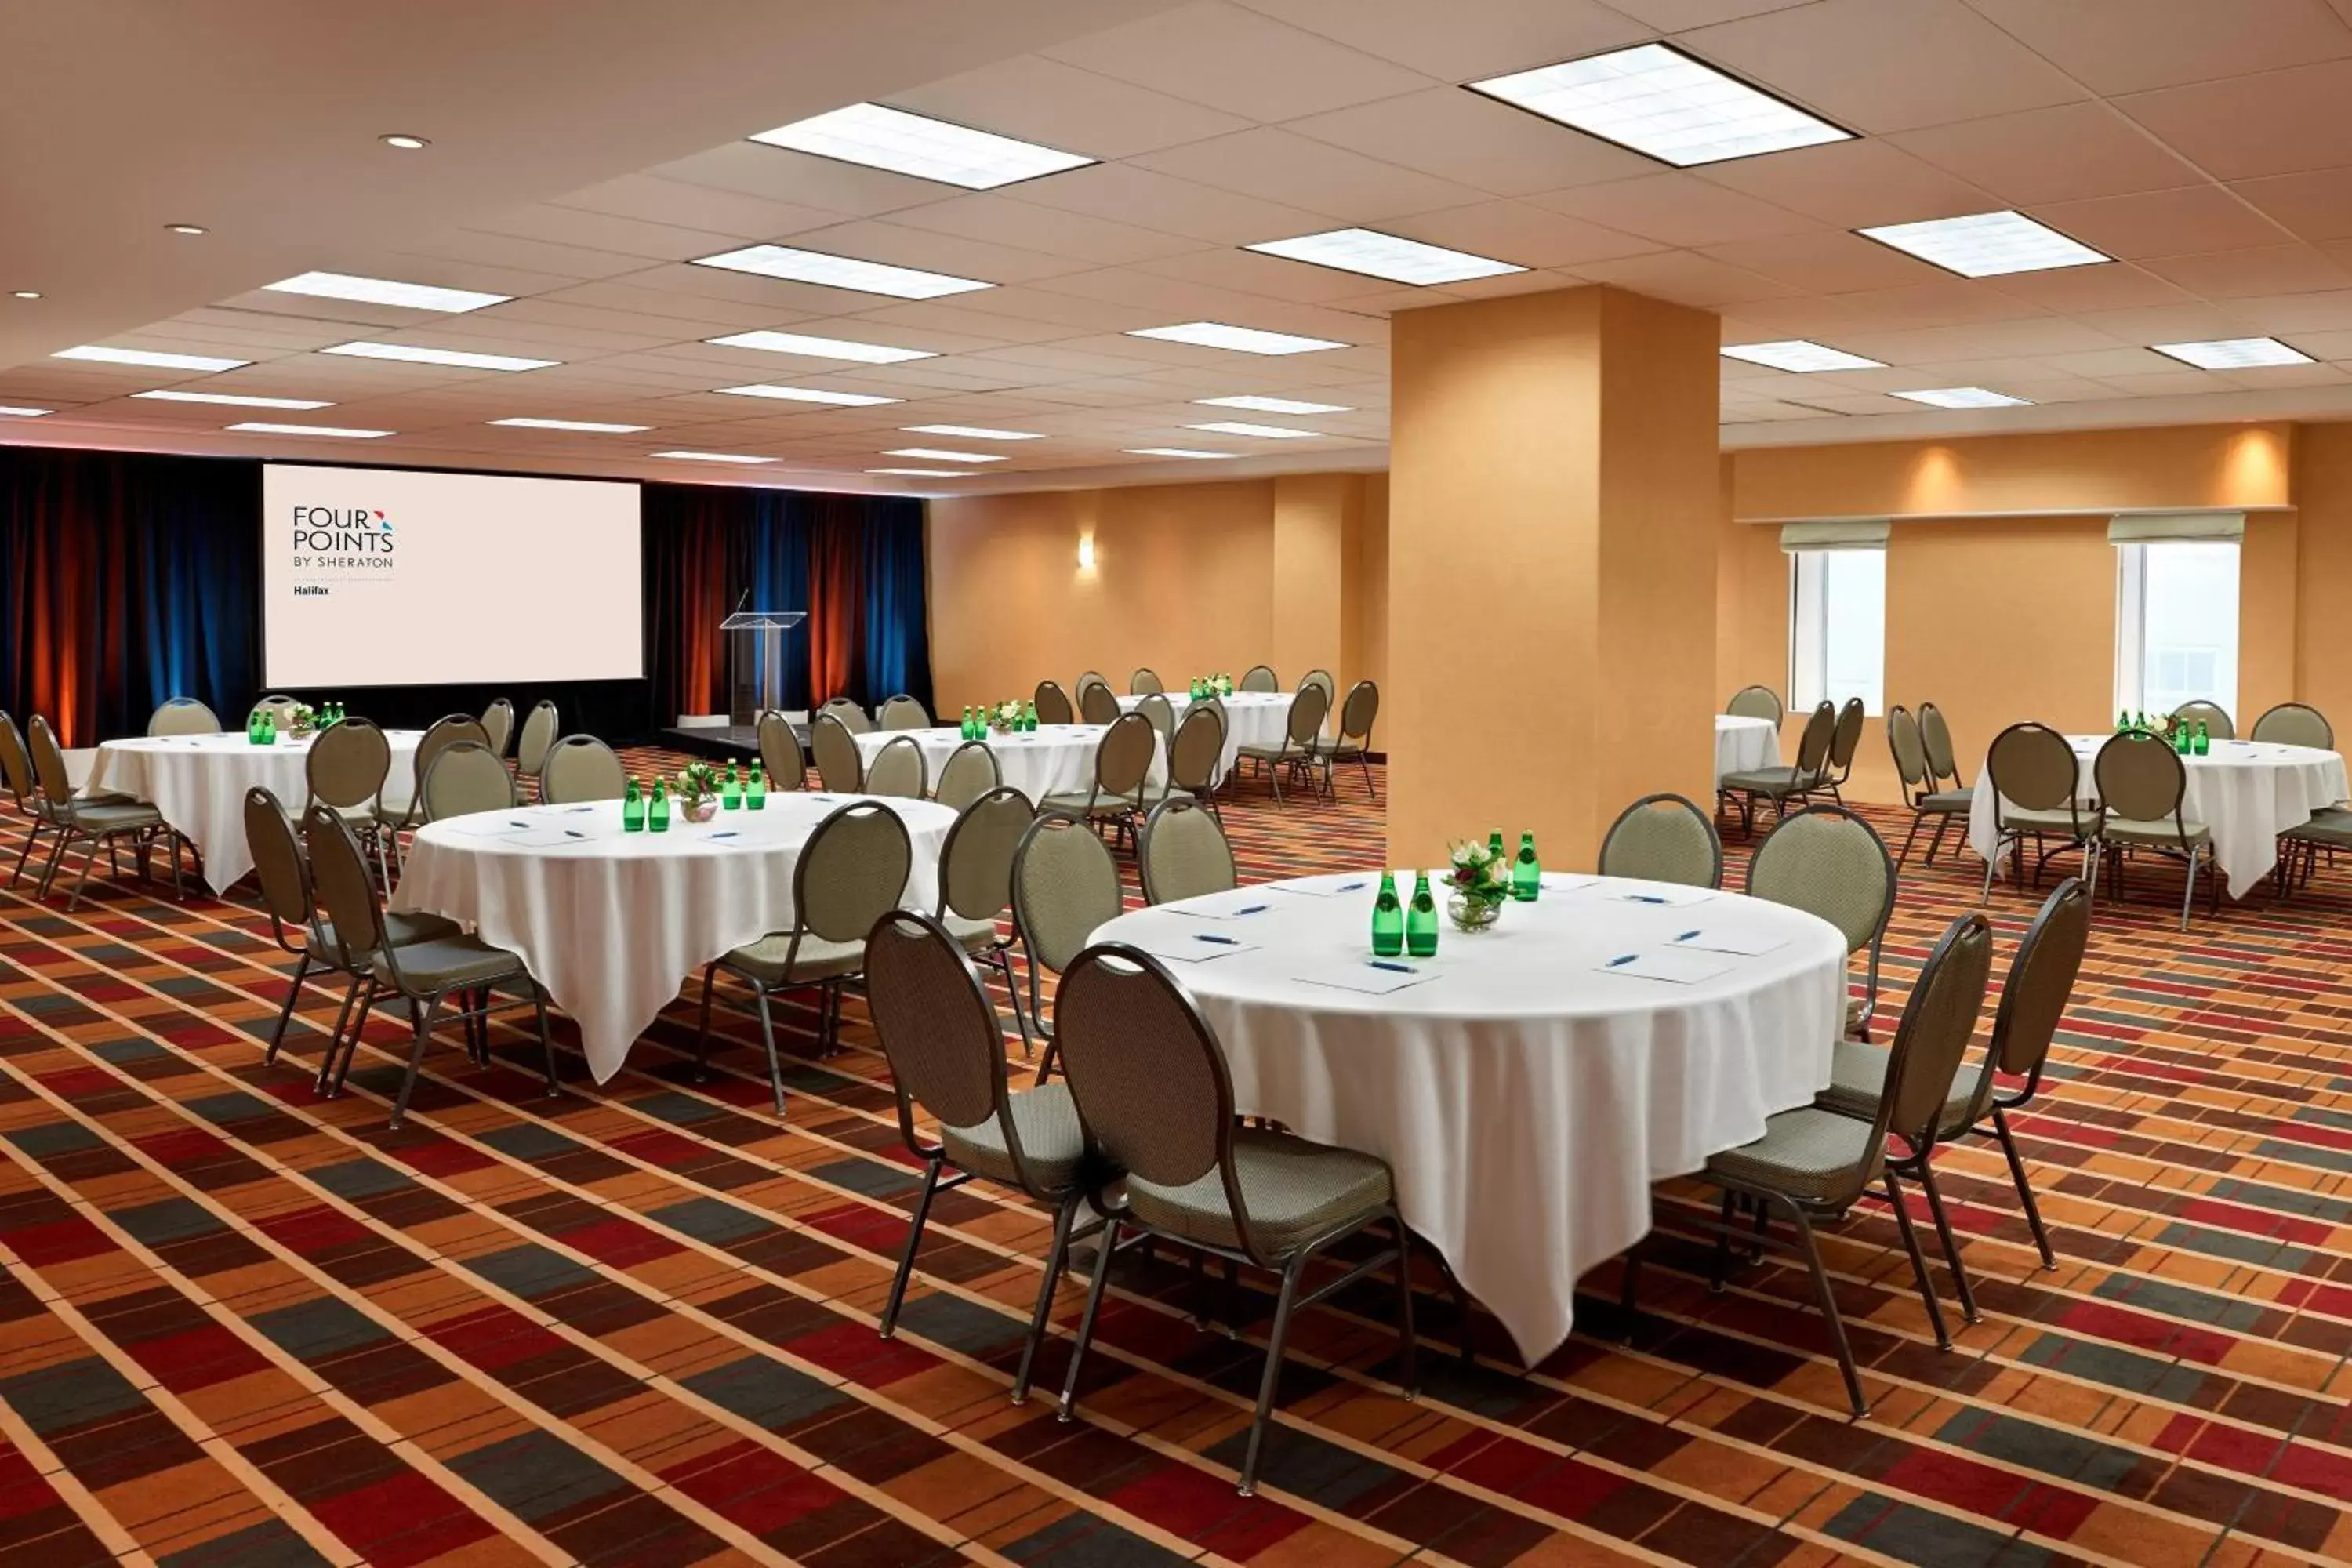 Meeting/conference room in Four Points by Sheraton Halifax